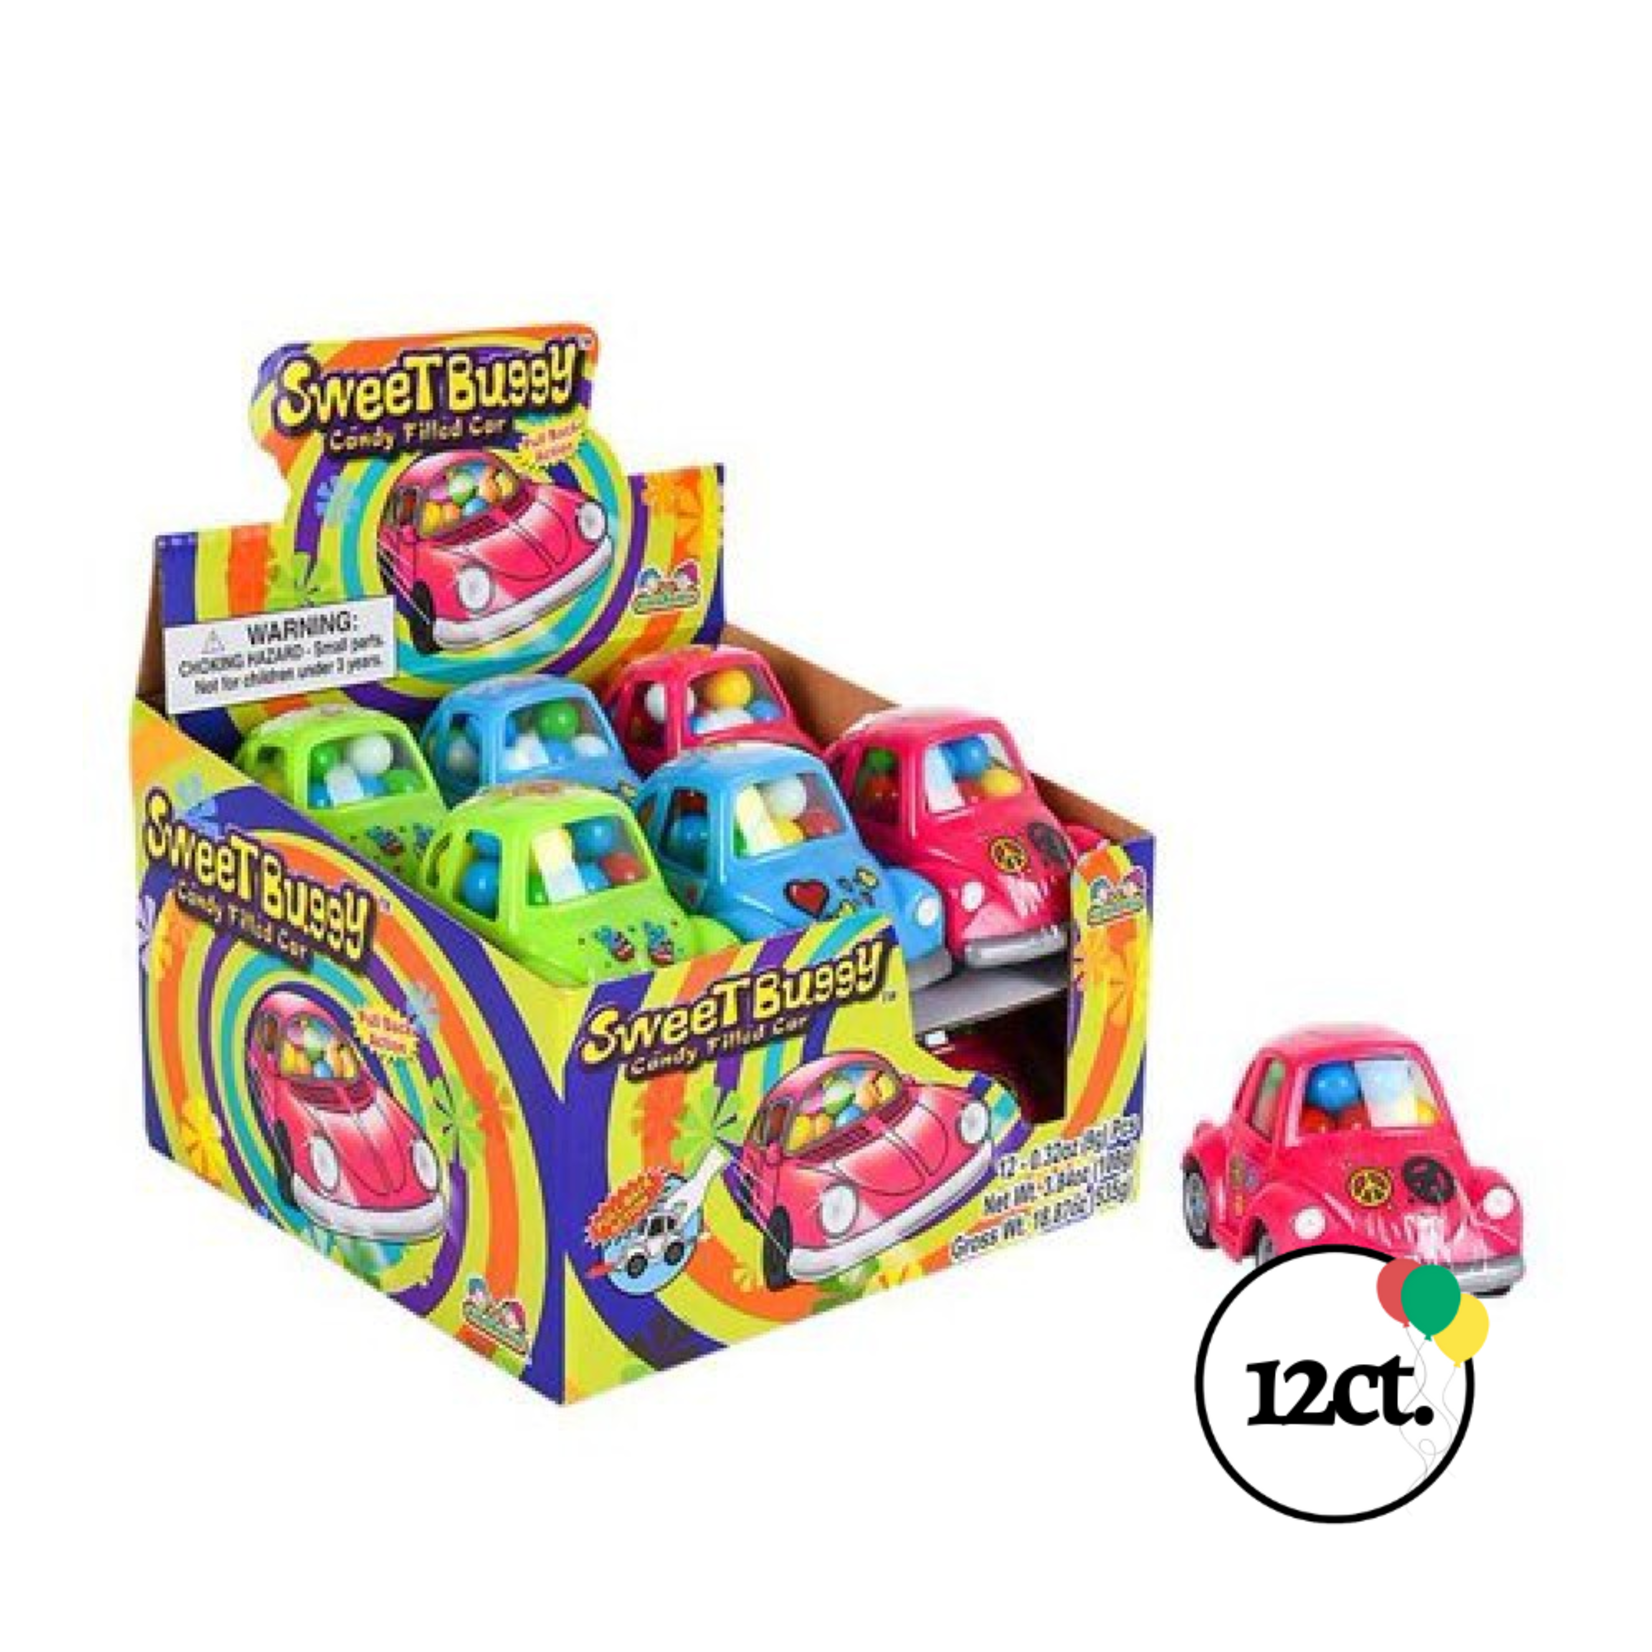 Kidsmania Sweet Buggy Candy Filled Car 12ct.